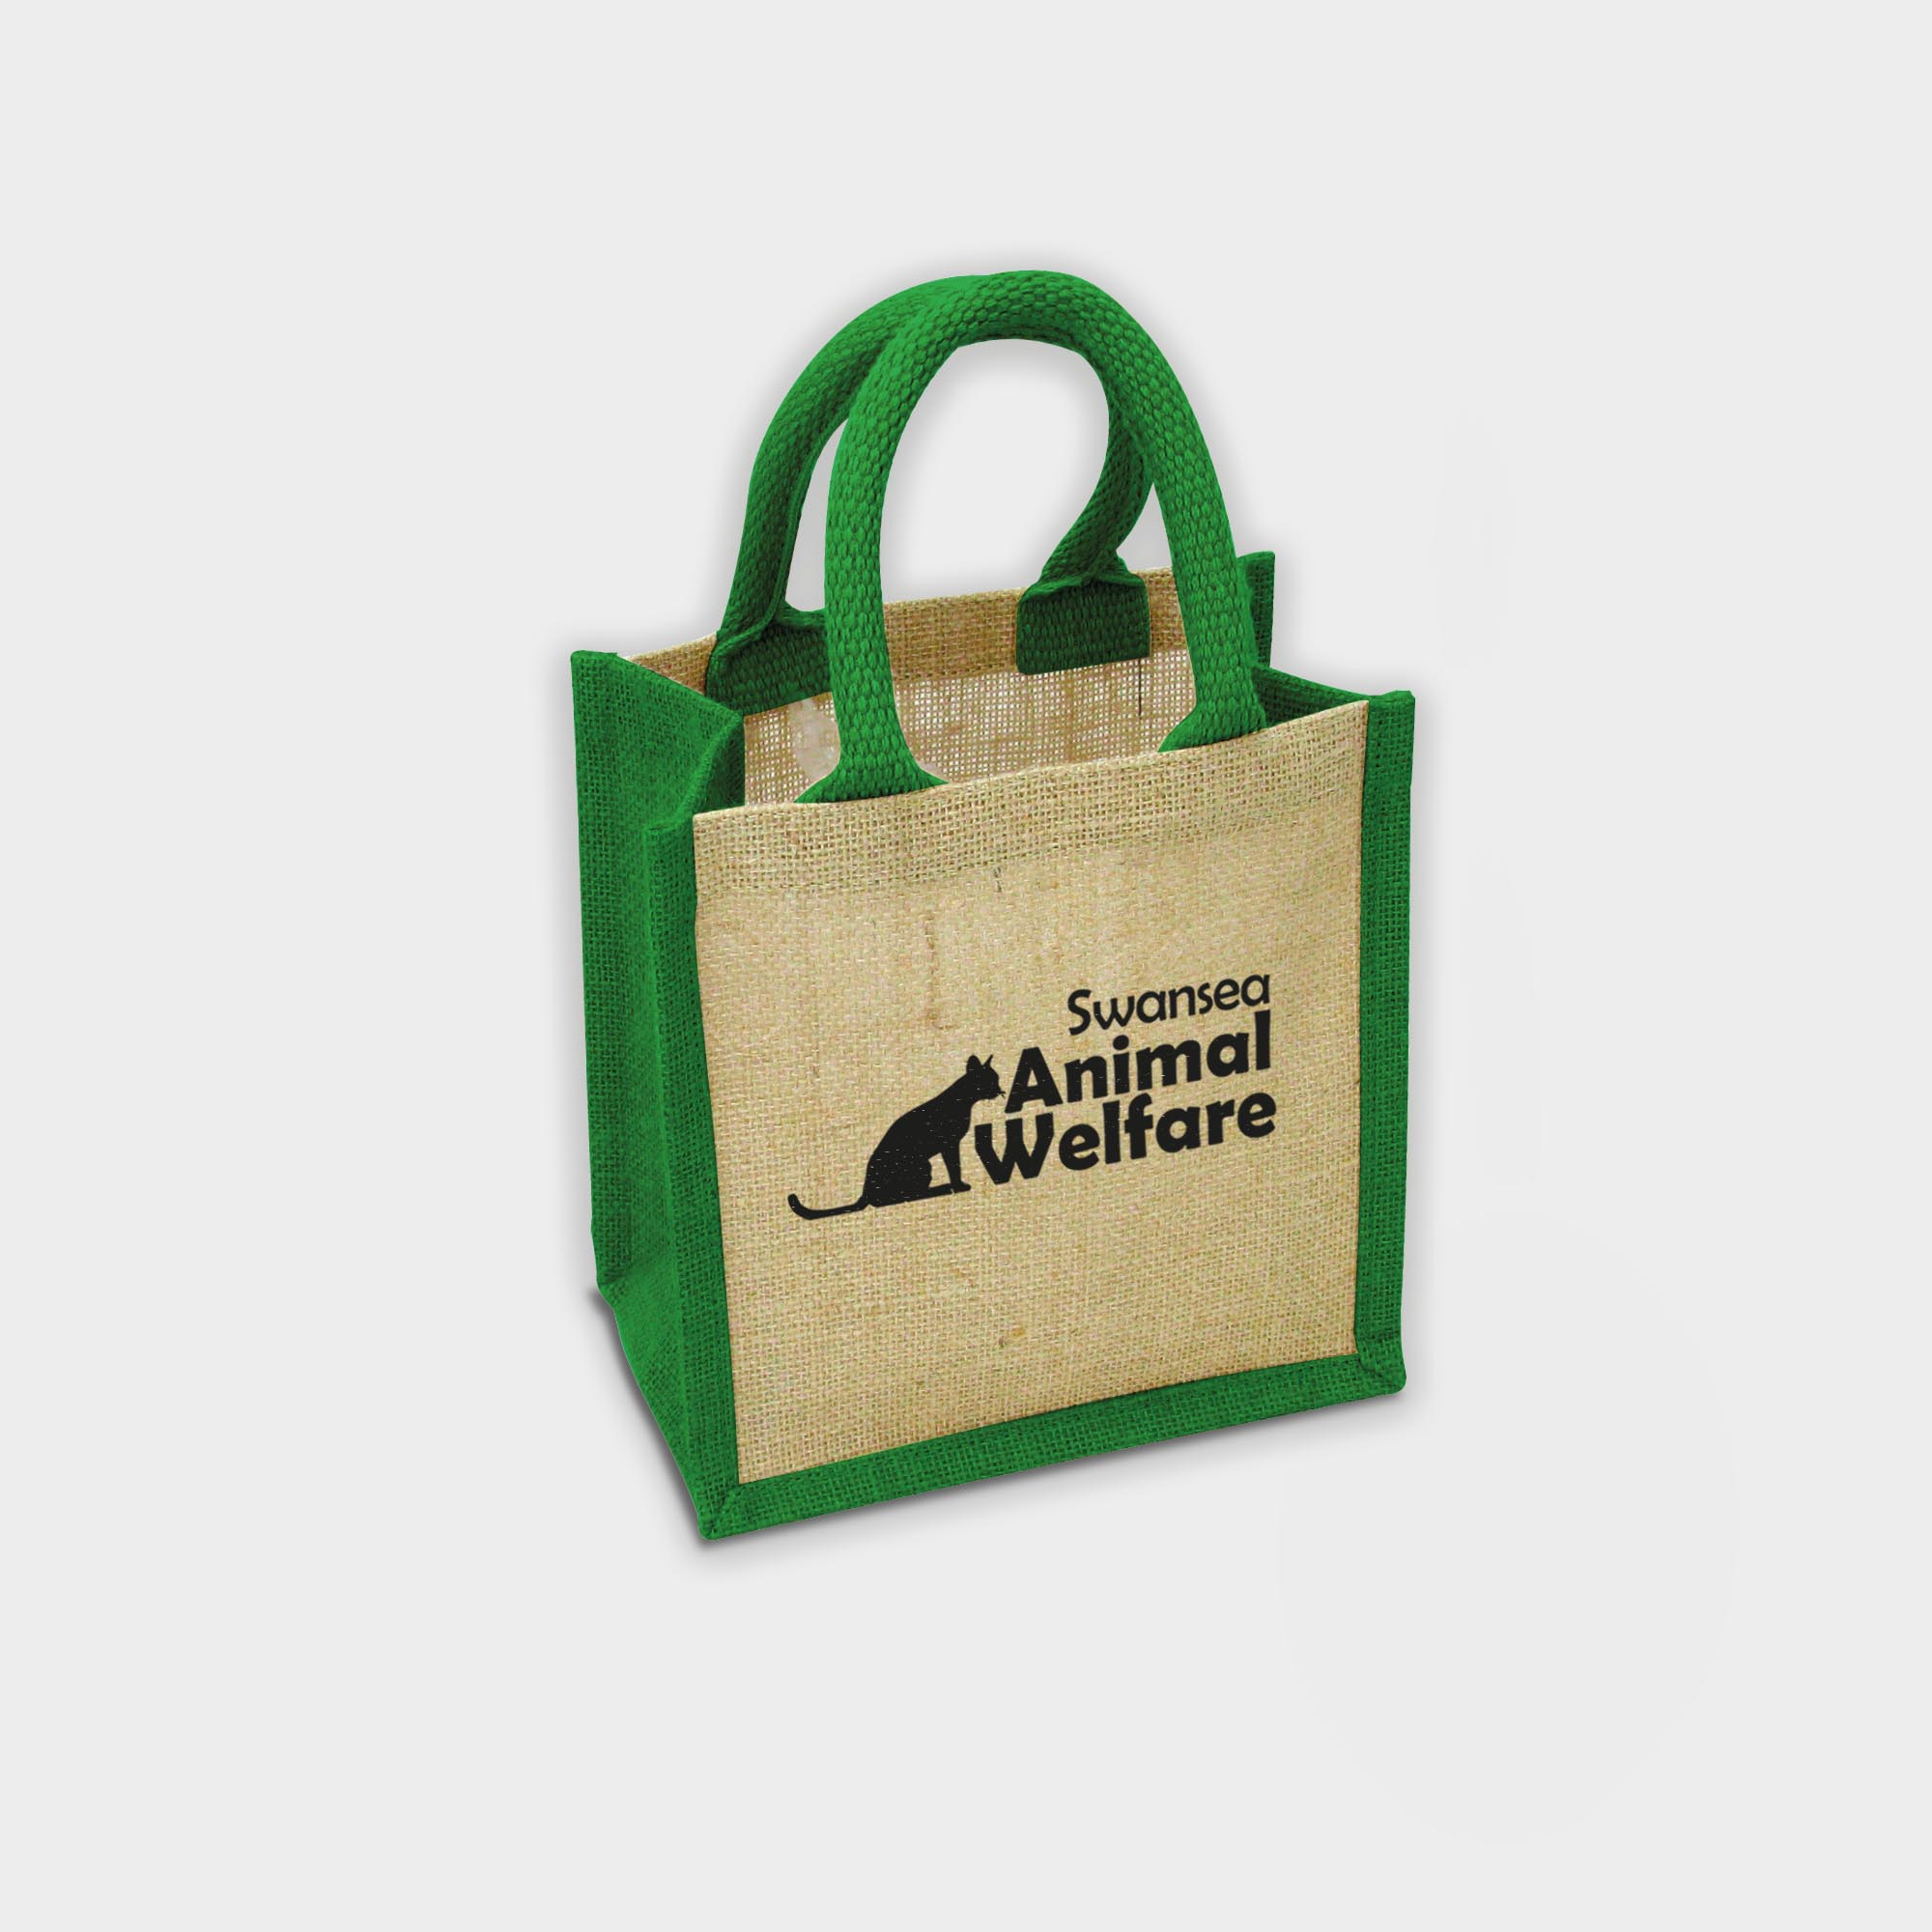 The Green & Good Wells Gift Bag is made from natural and sustainable jute. It comes with a small cotton over rope handle and is available in various trim colours. A perfect accompaniment for an executive gift or small gift set. Ethically produced in India in an audited factory. Natural / Green